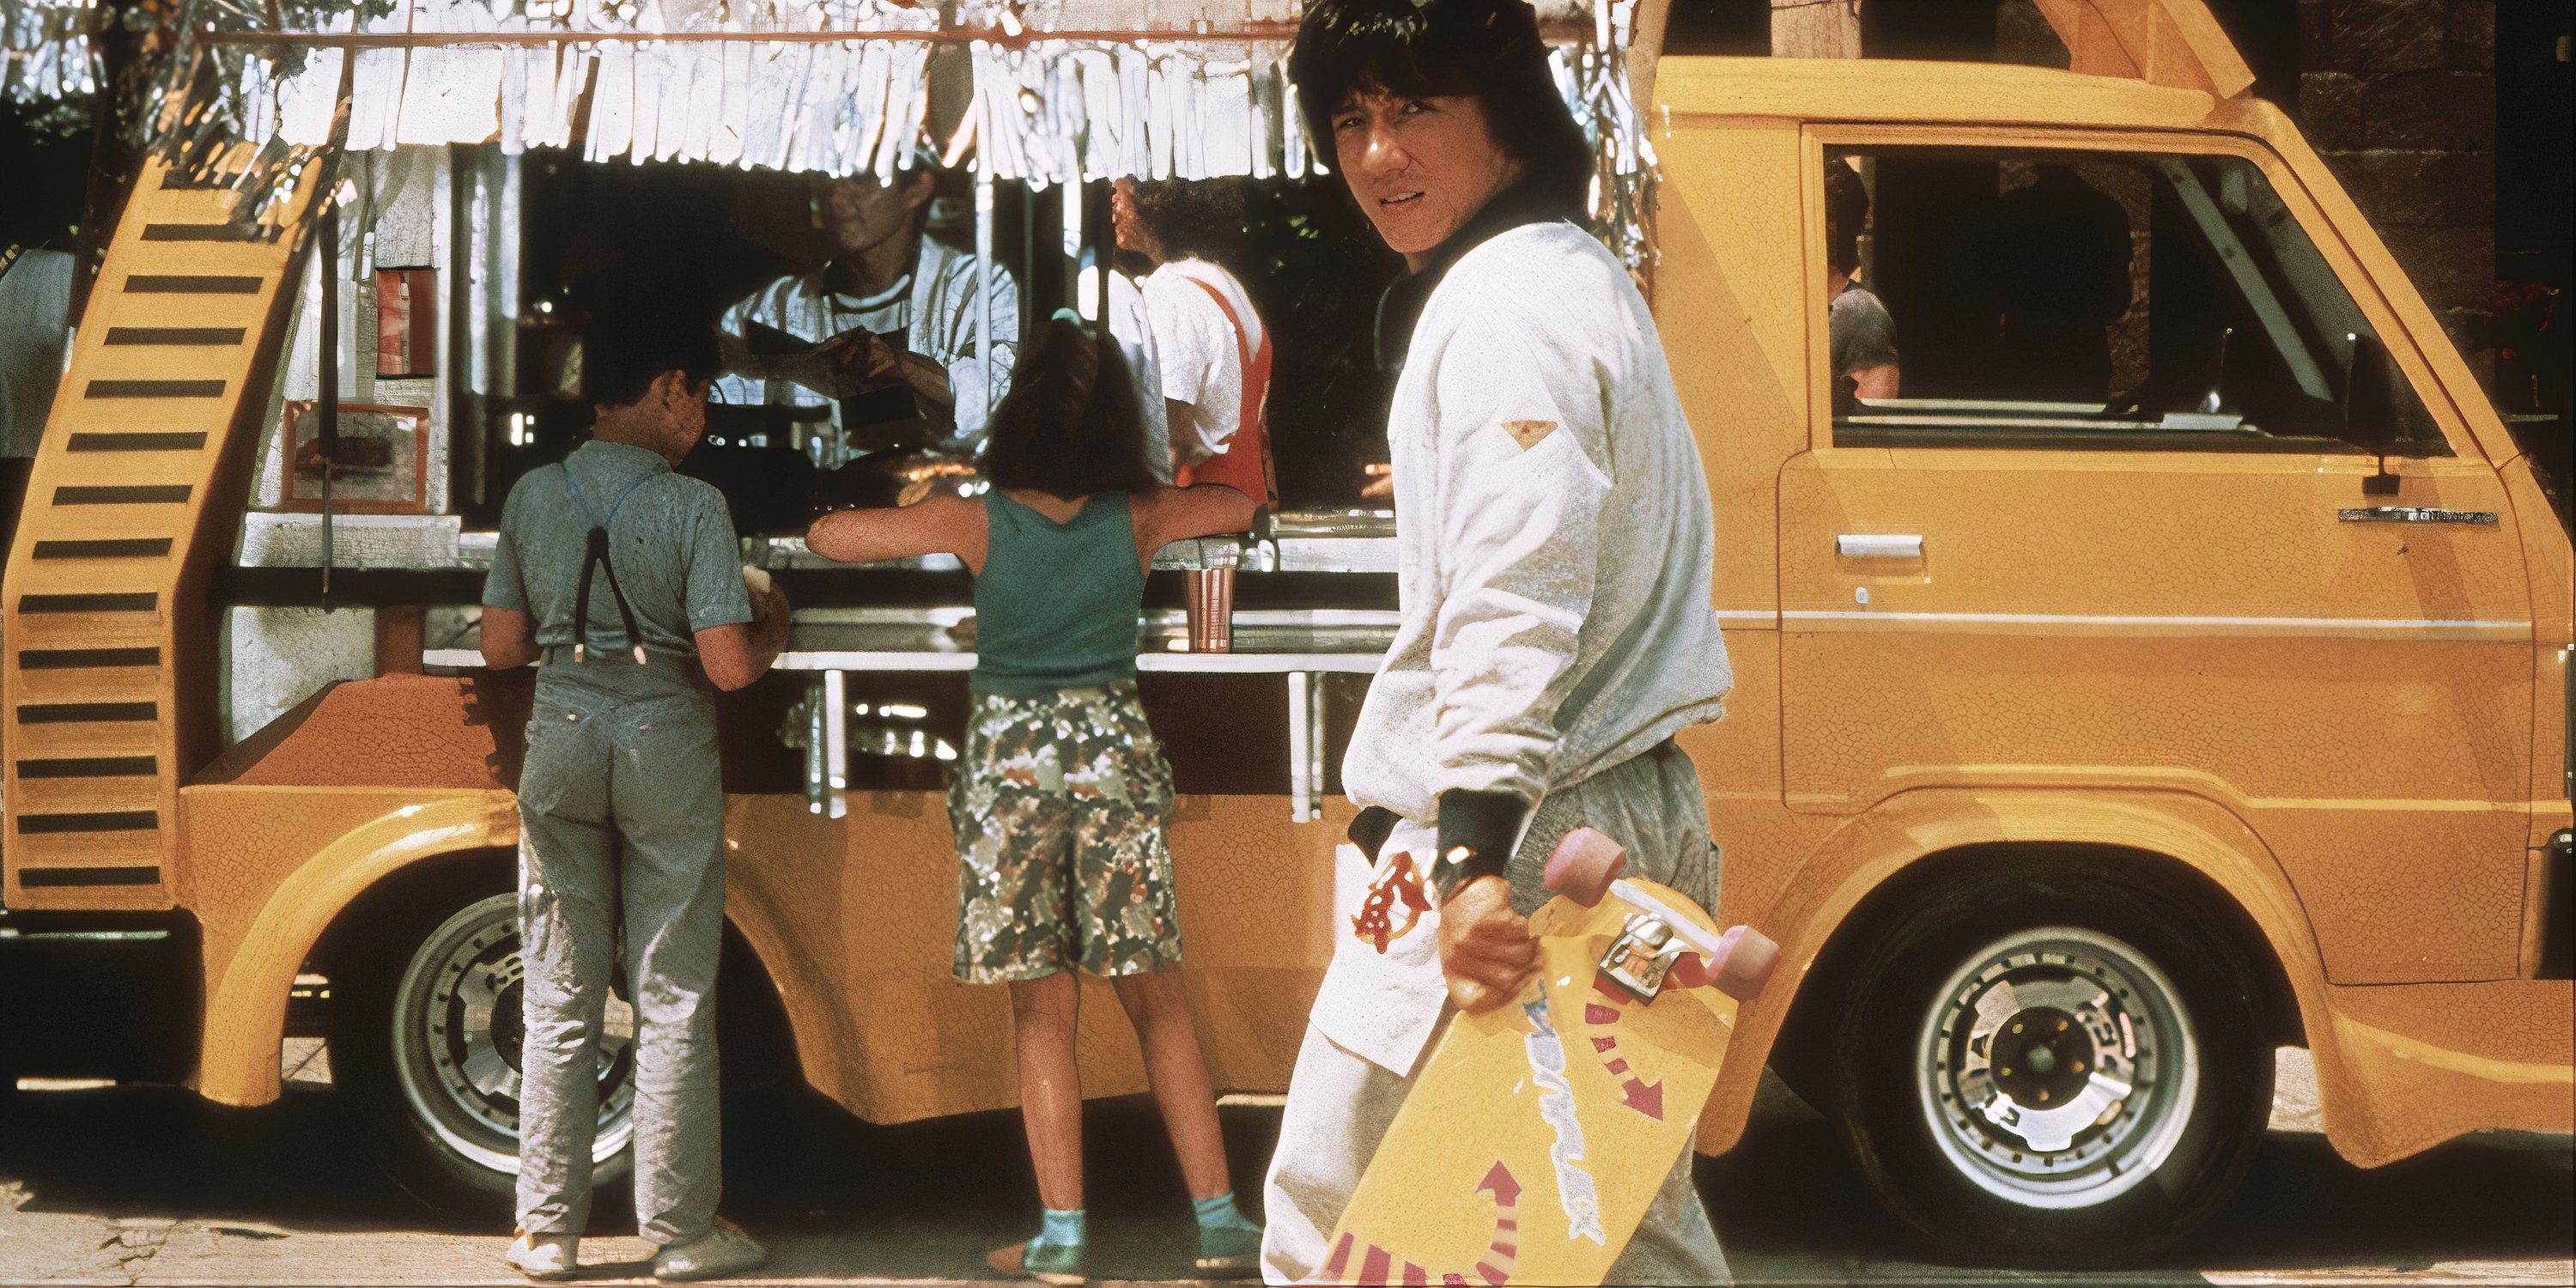 Jack Chan, holding a skateboard, looking back at the camera in Wheels on Meals.